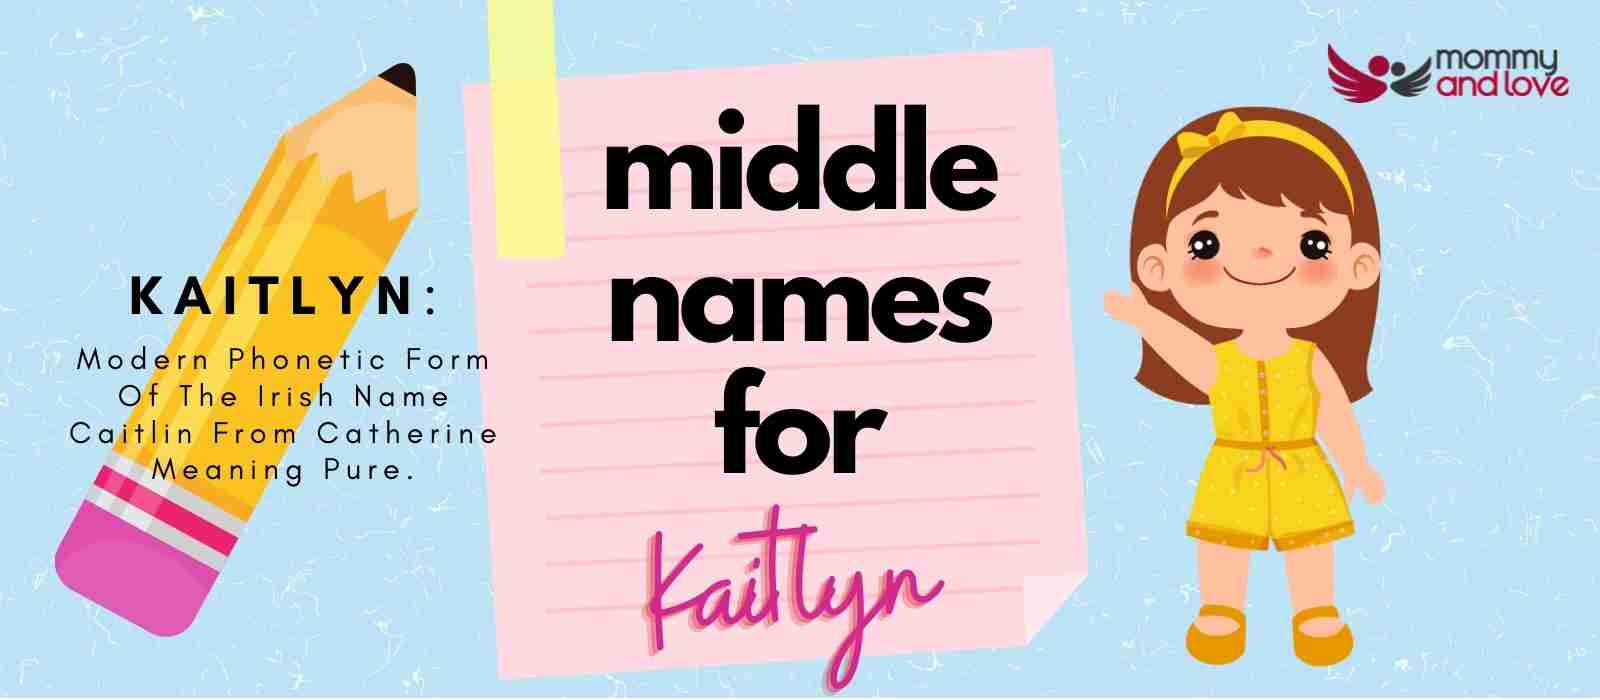 Middle Names for Kaitlyn